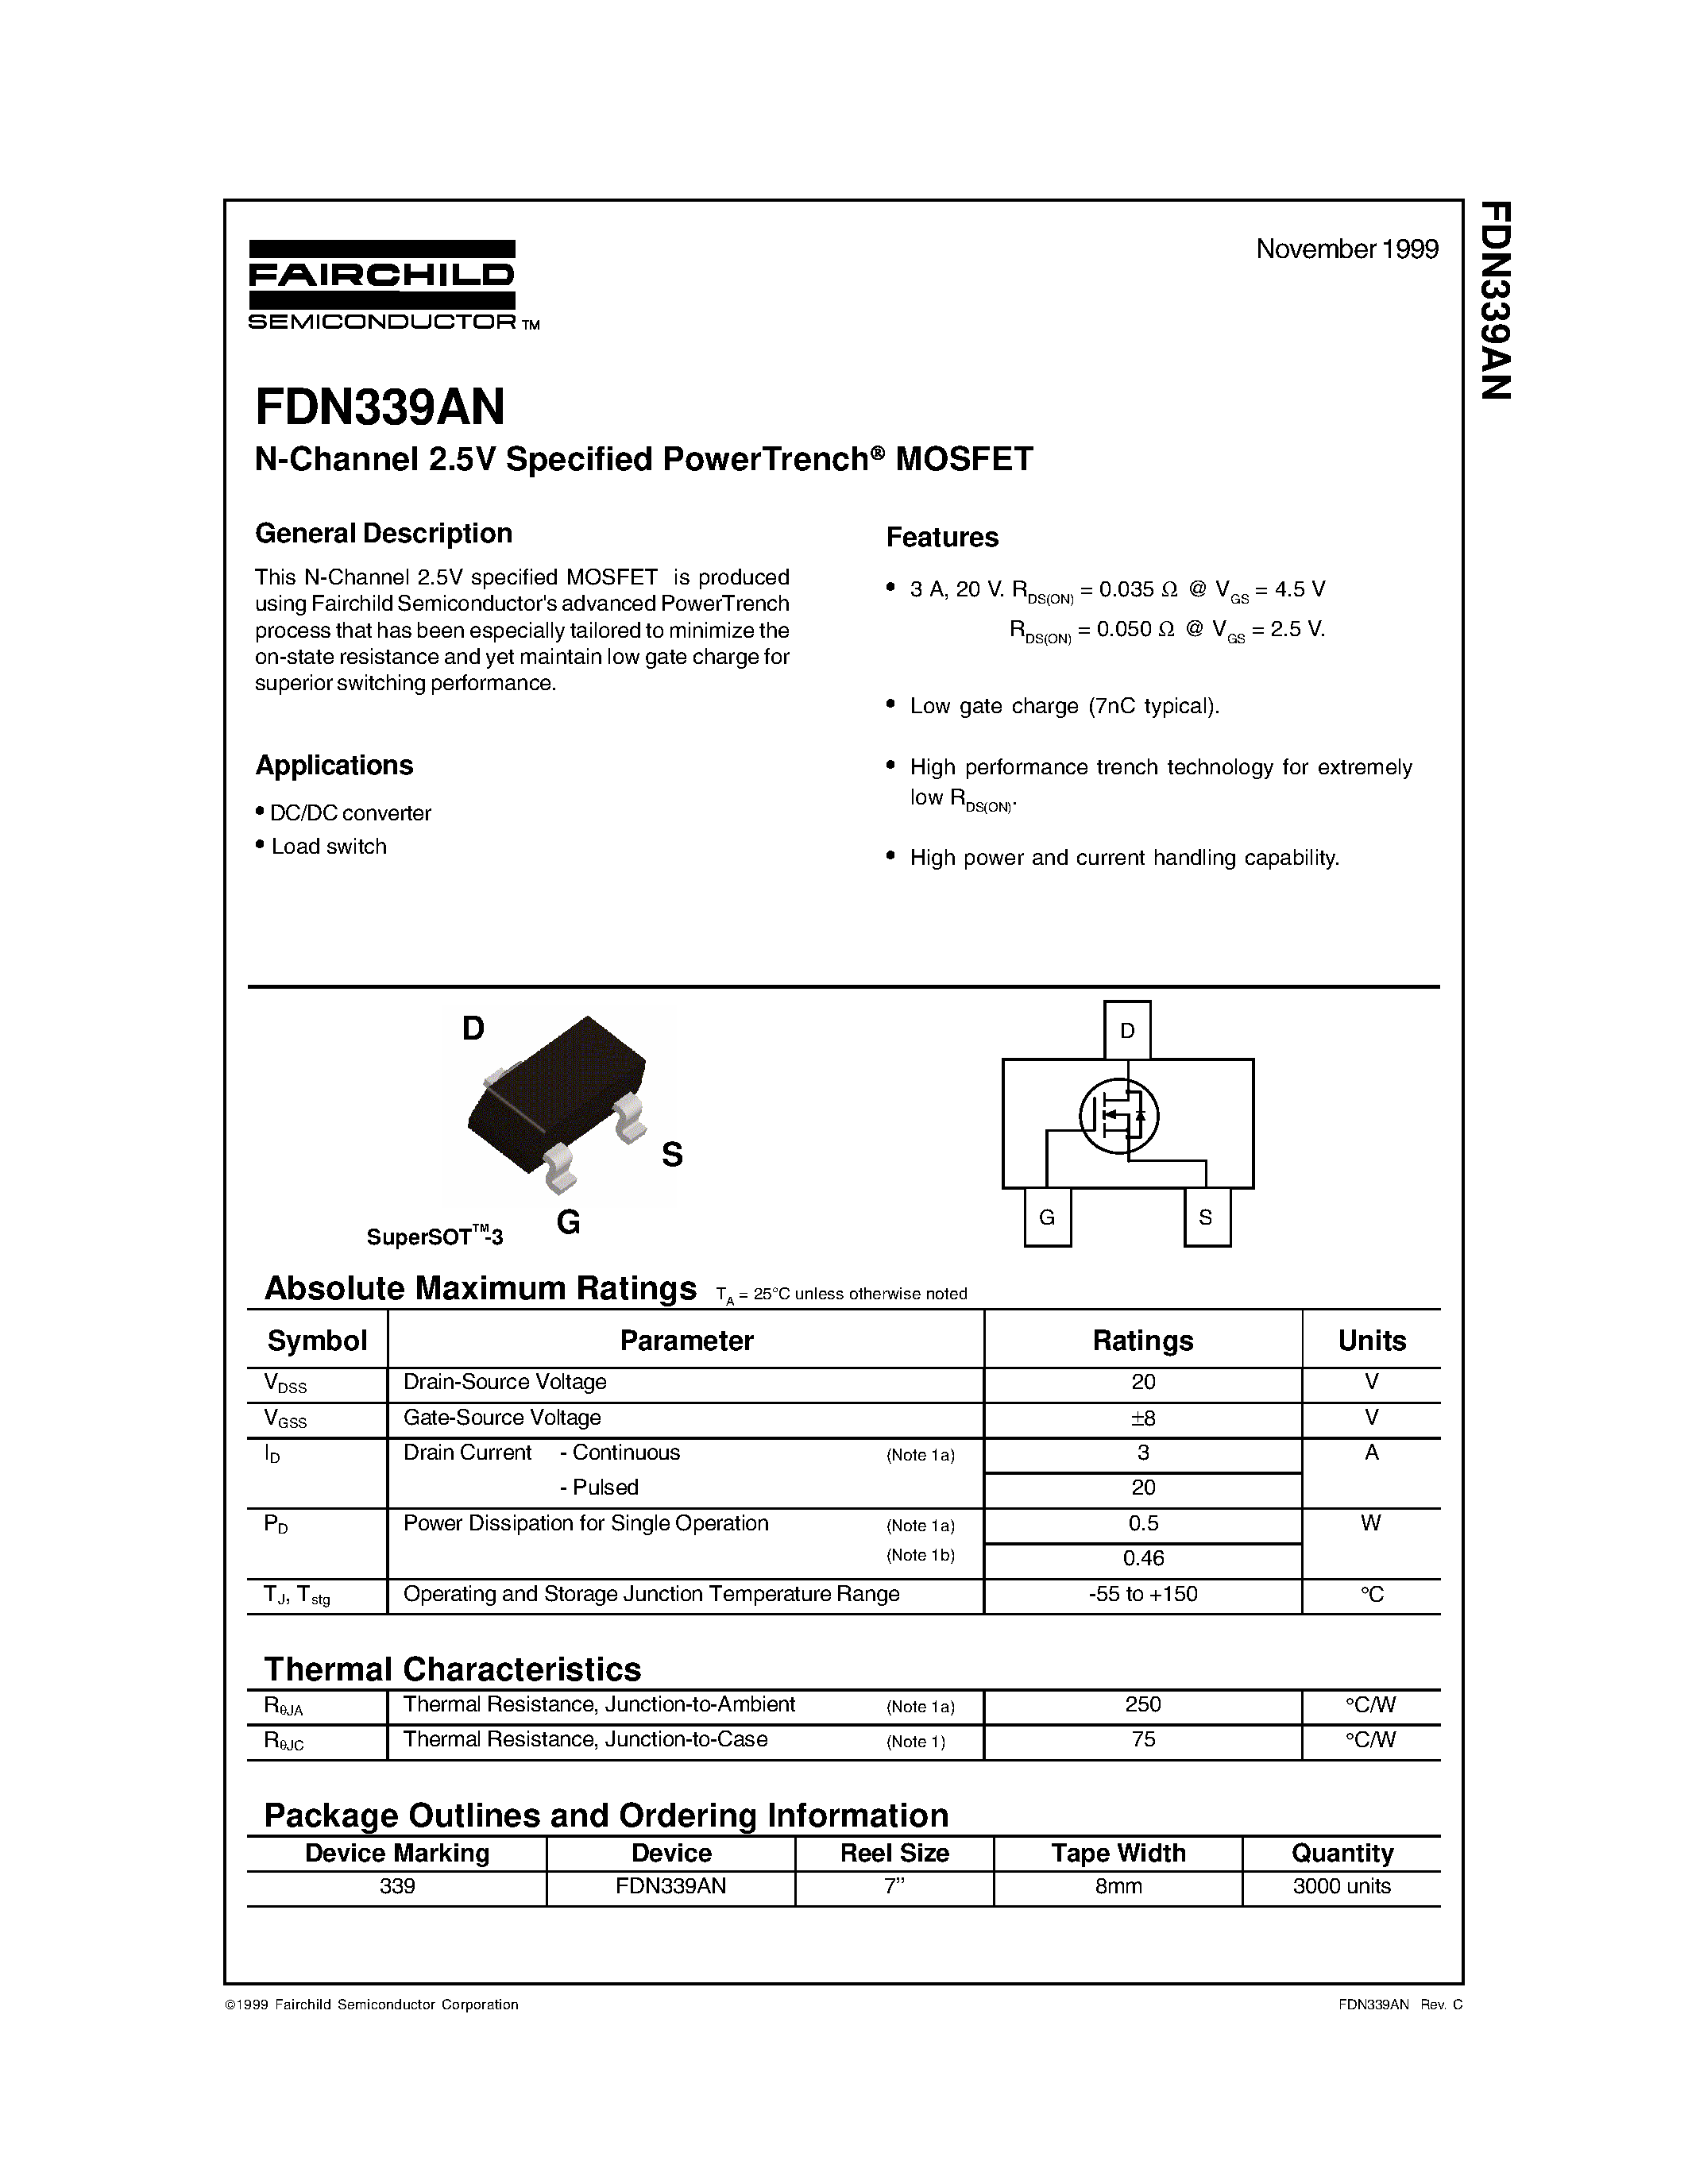 Даташит FDN339AN-N-Channel 2.5V Specified PowerTrench MOSFET страница 1